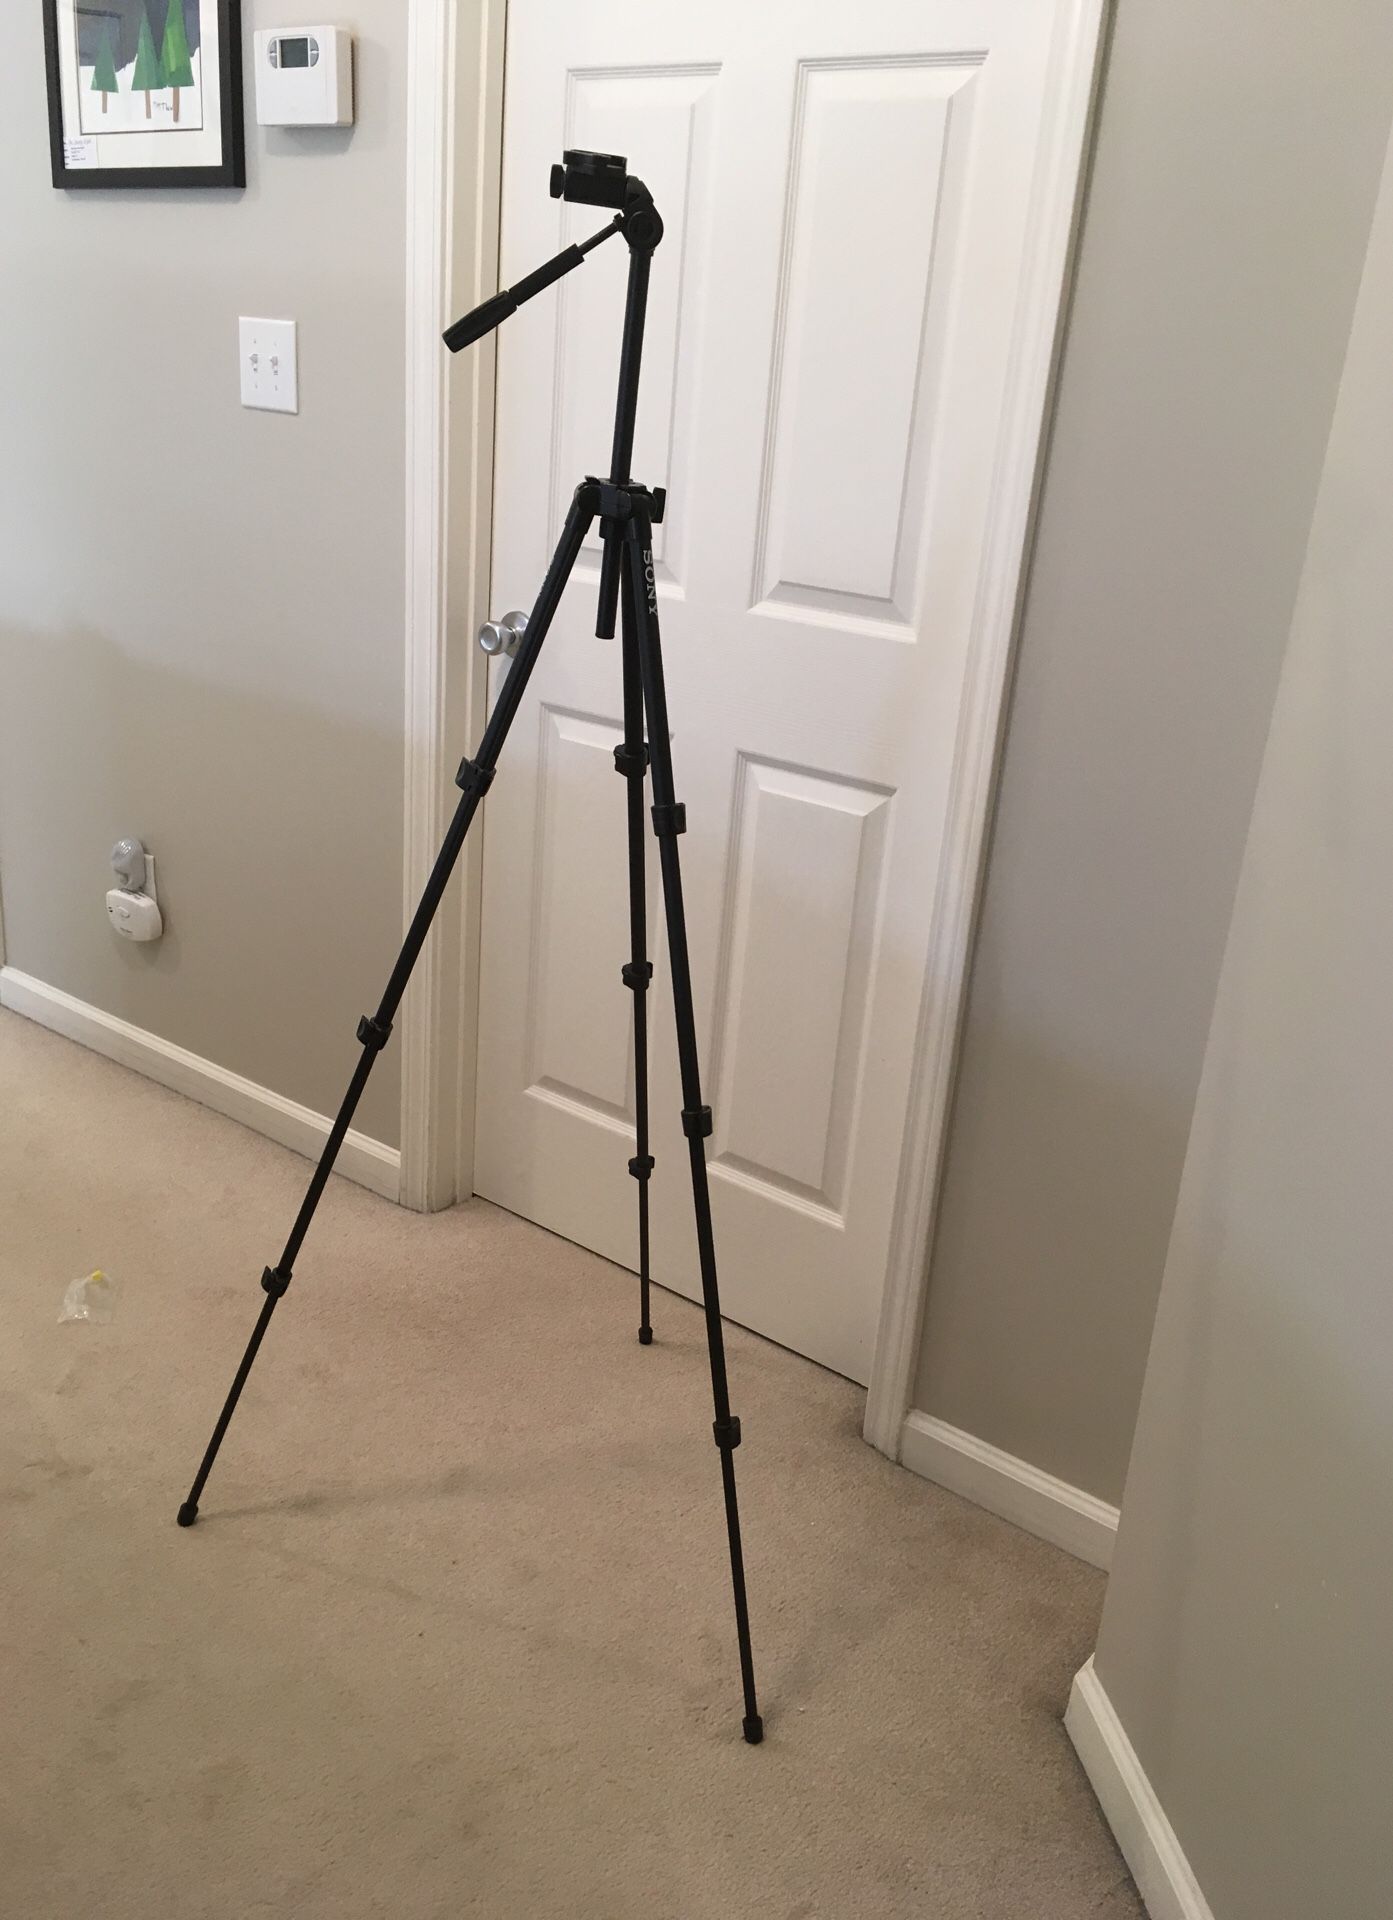 Sony adjustable tripod for cameras and camcorders VCT-1500L expands to 59 inches